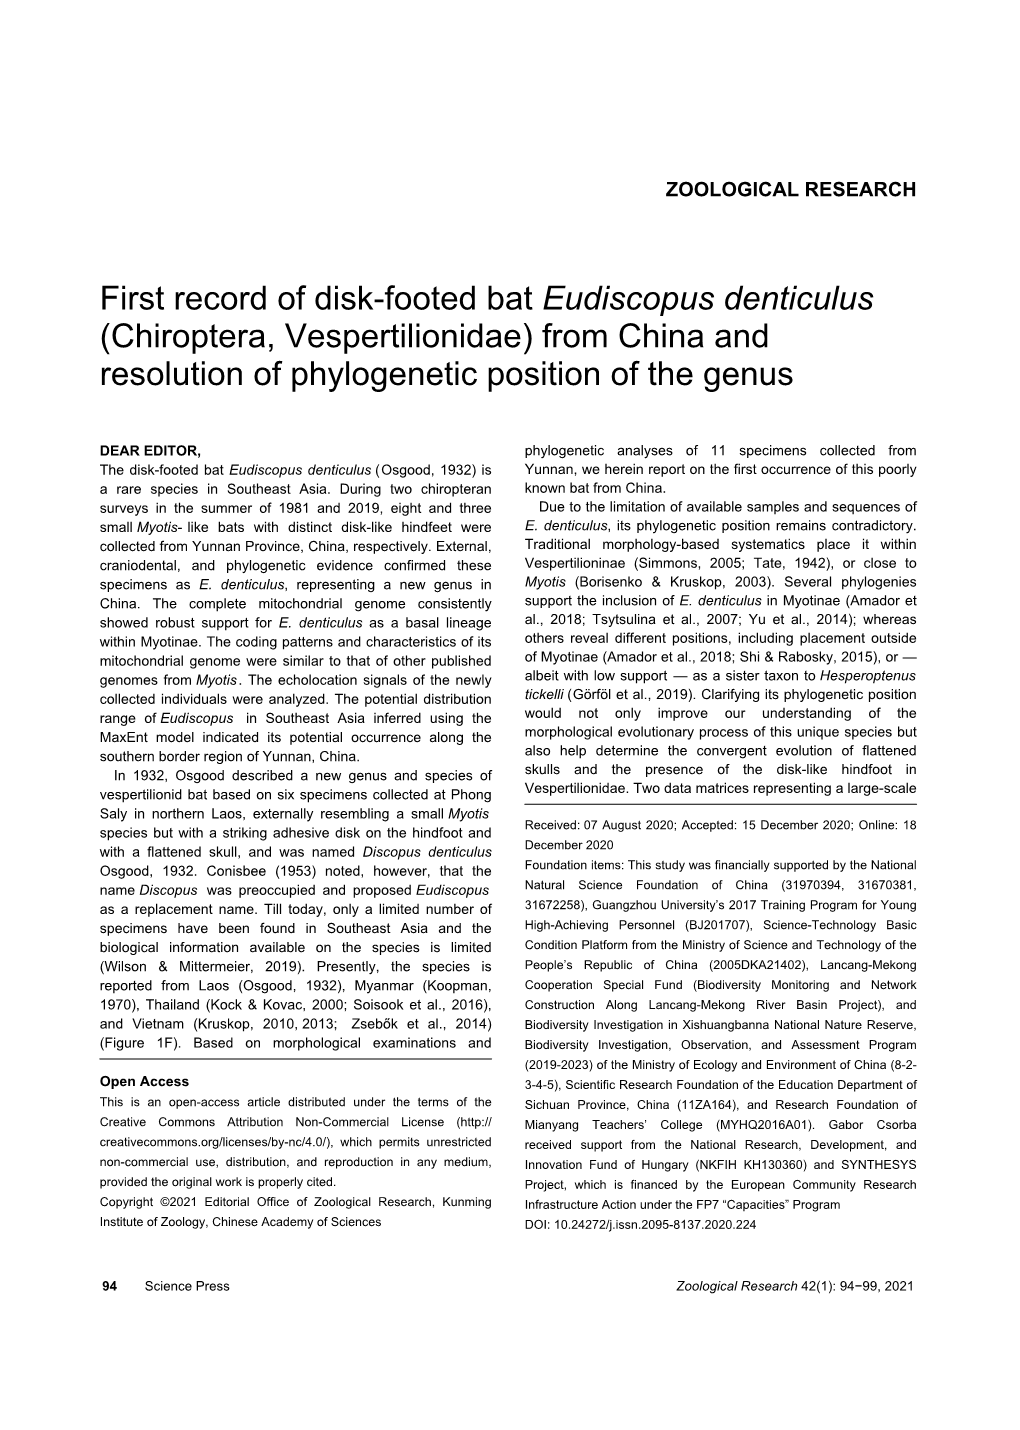 First Record of Disk-Footed Bat Eudiscopus Denticulus (Chiroptera, Vespertilionidae) from China and Resolution of Phylogenetic Position of the Genus